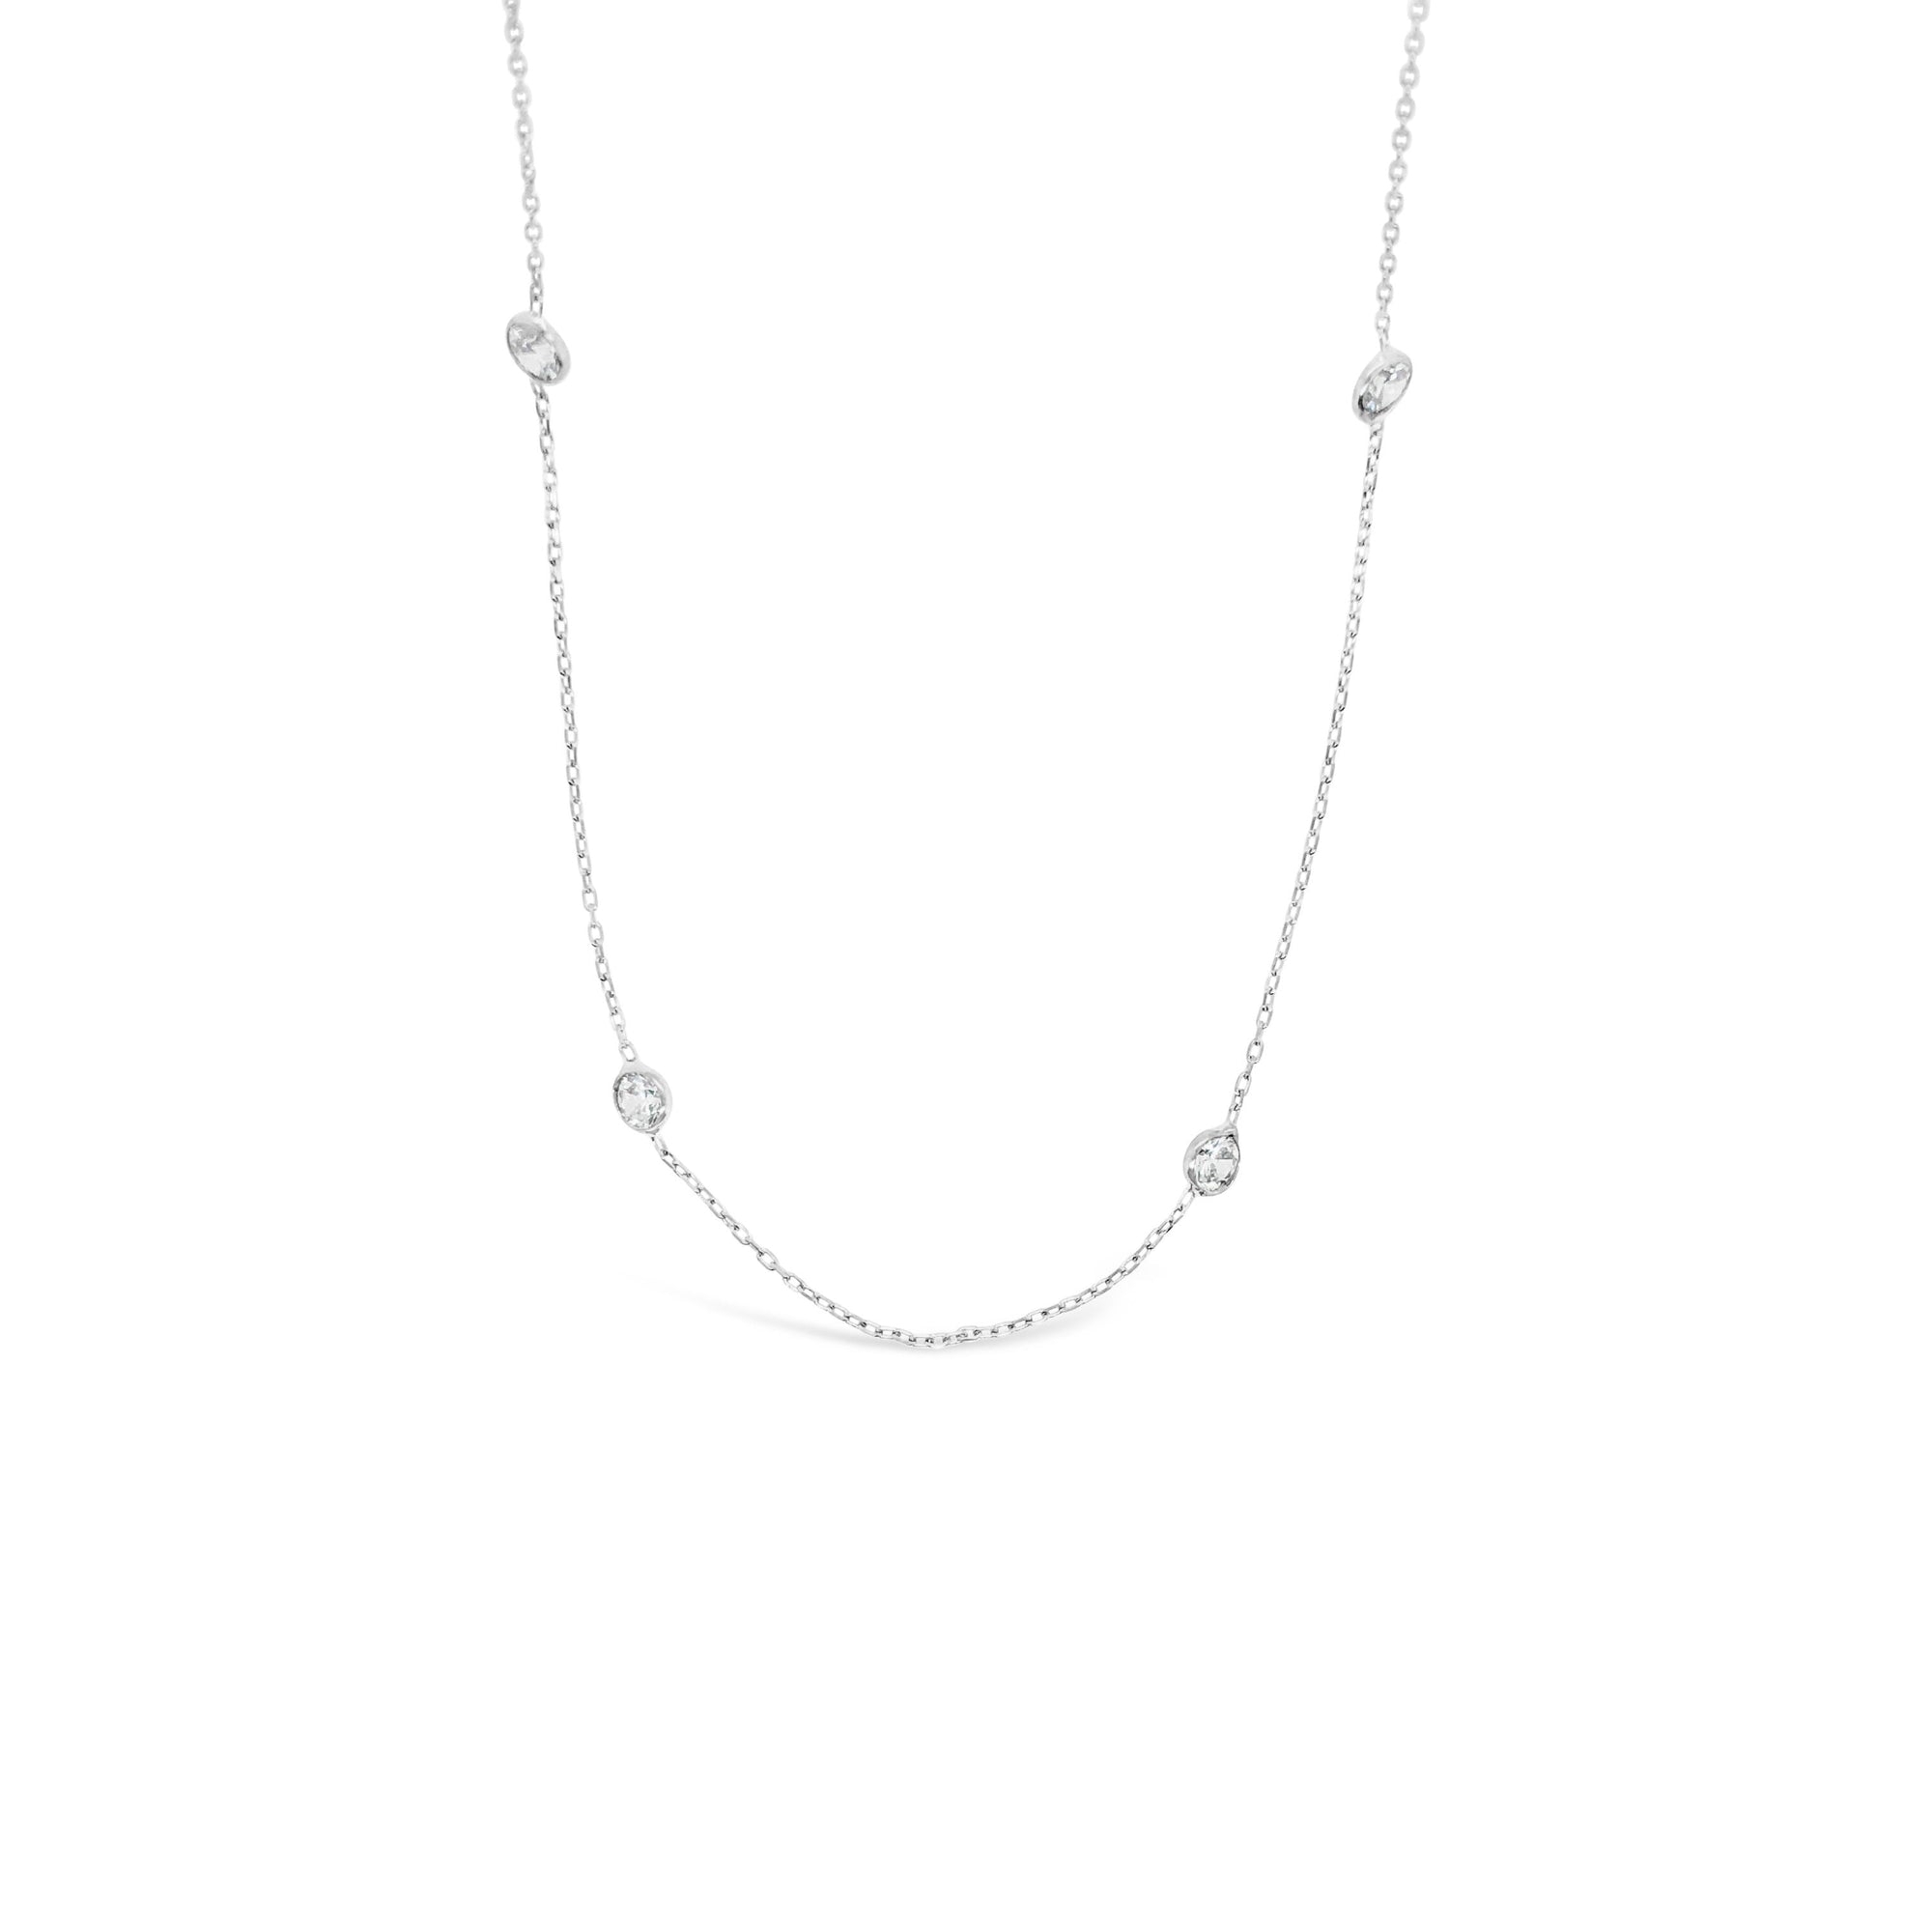 Duo Jewellery Necklaces Silver Duo Wish Silver Necklace